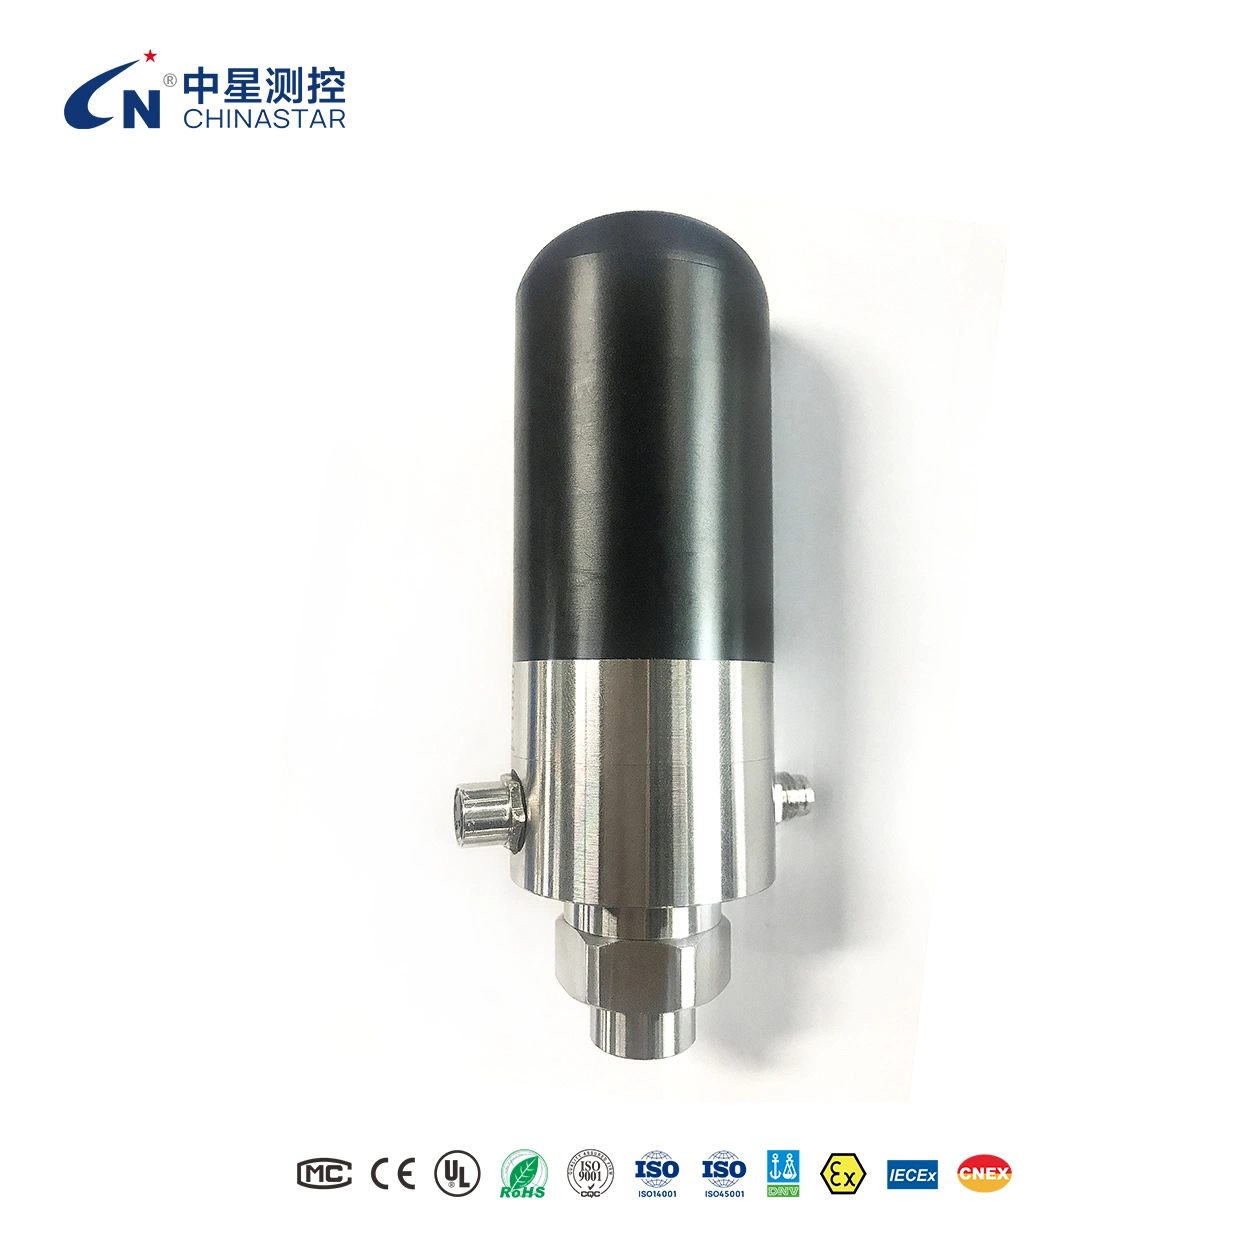 Chinastar Wireless Bluetooth Temperature and Pressure Transducer Integrated Circuits and Accessories APP Can Monitor and Collect Data in Real Time